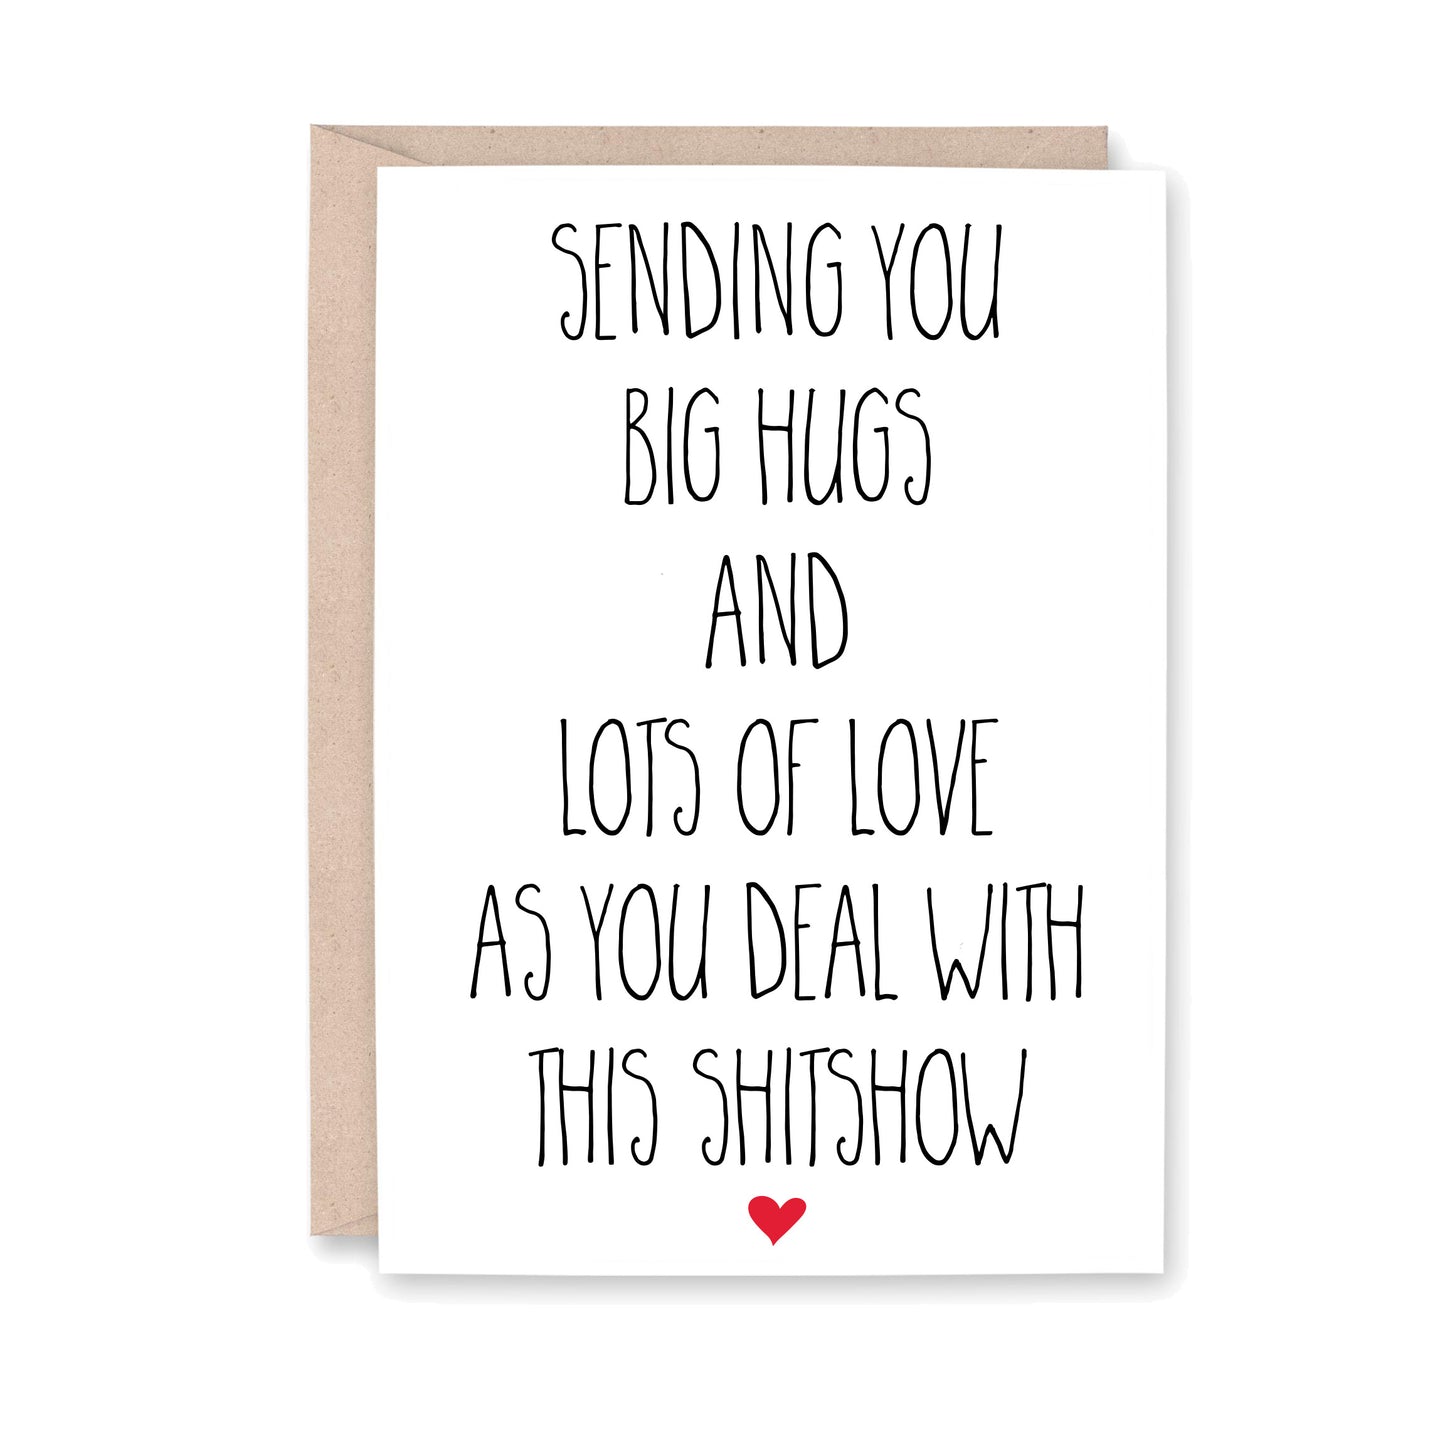 sending you big hugs and lots of love as you deal with this shitshow